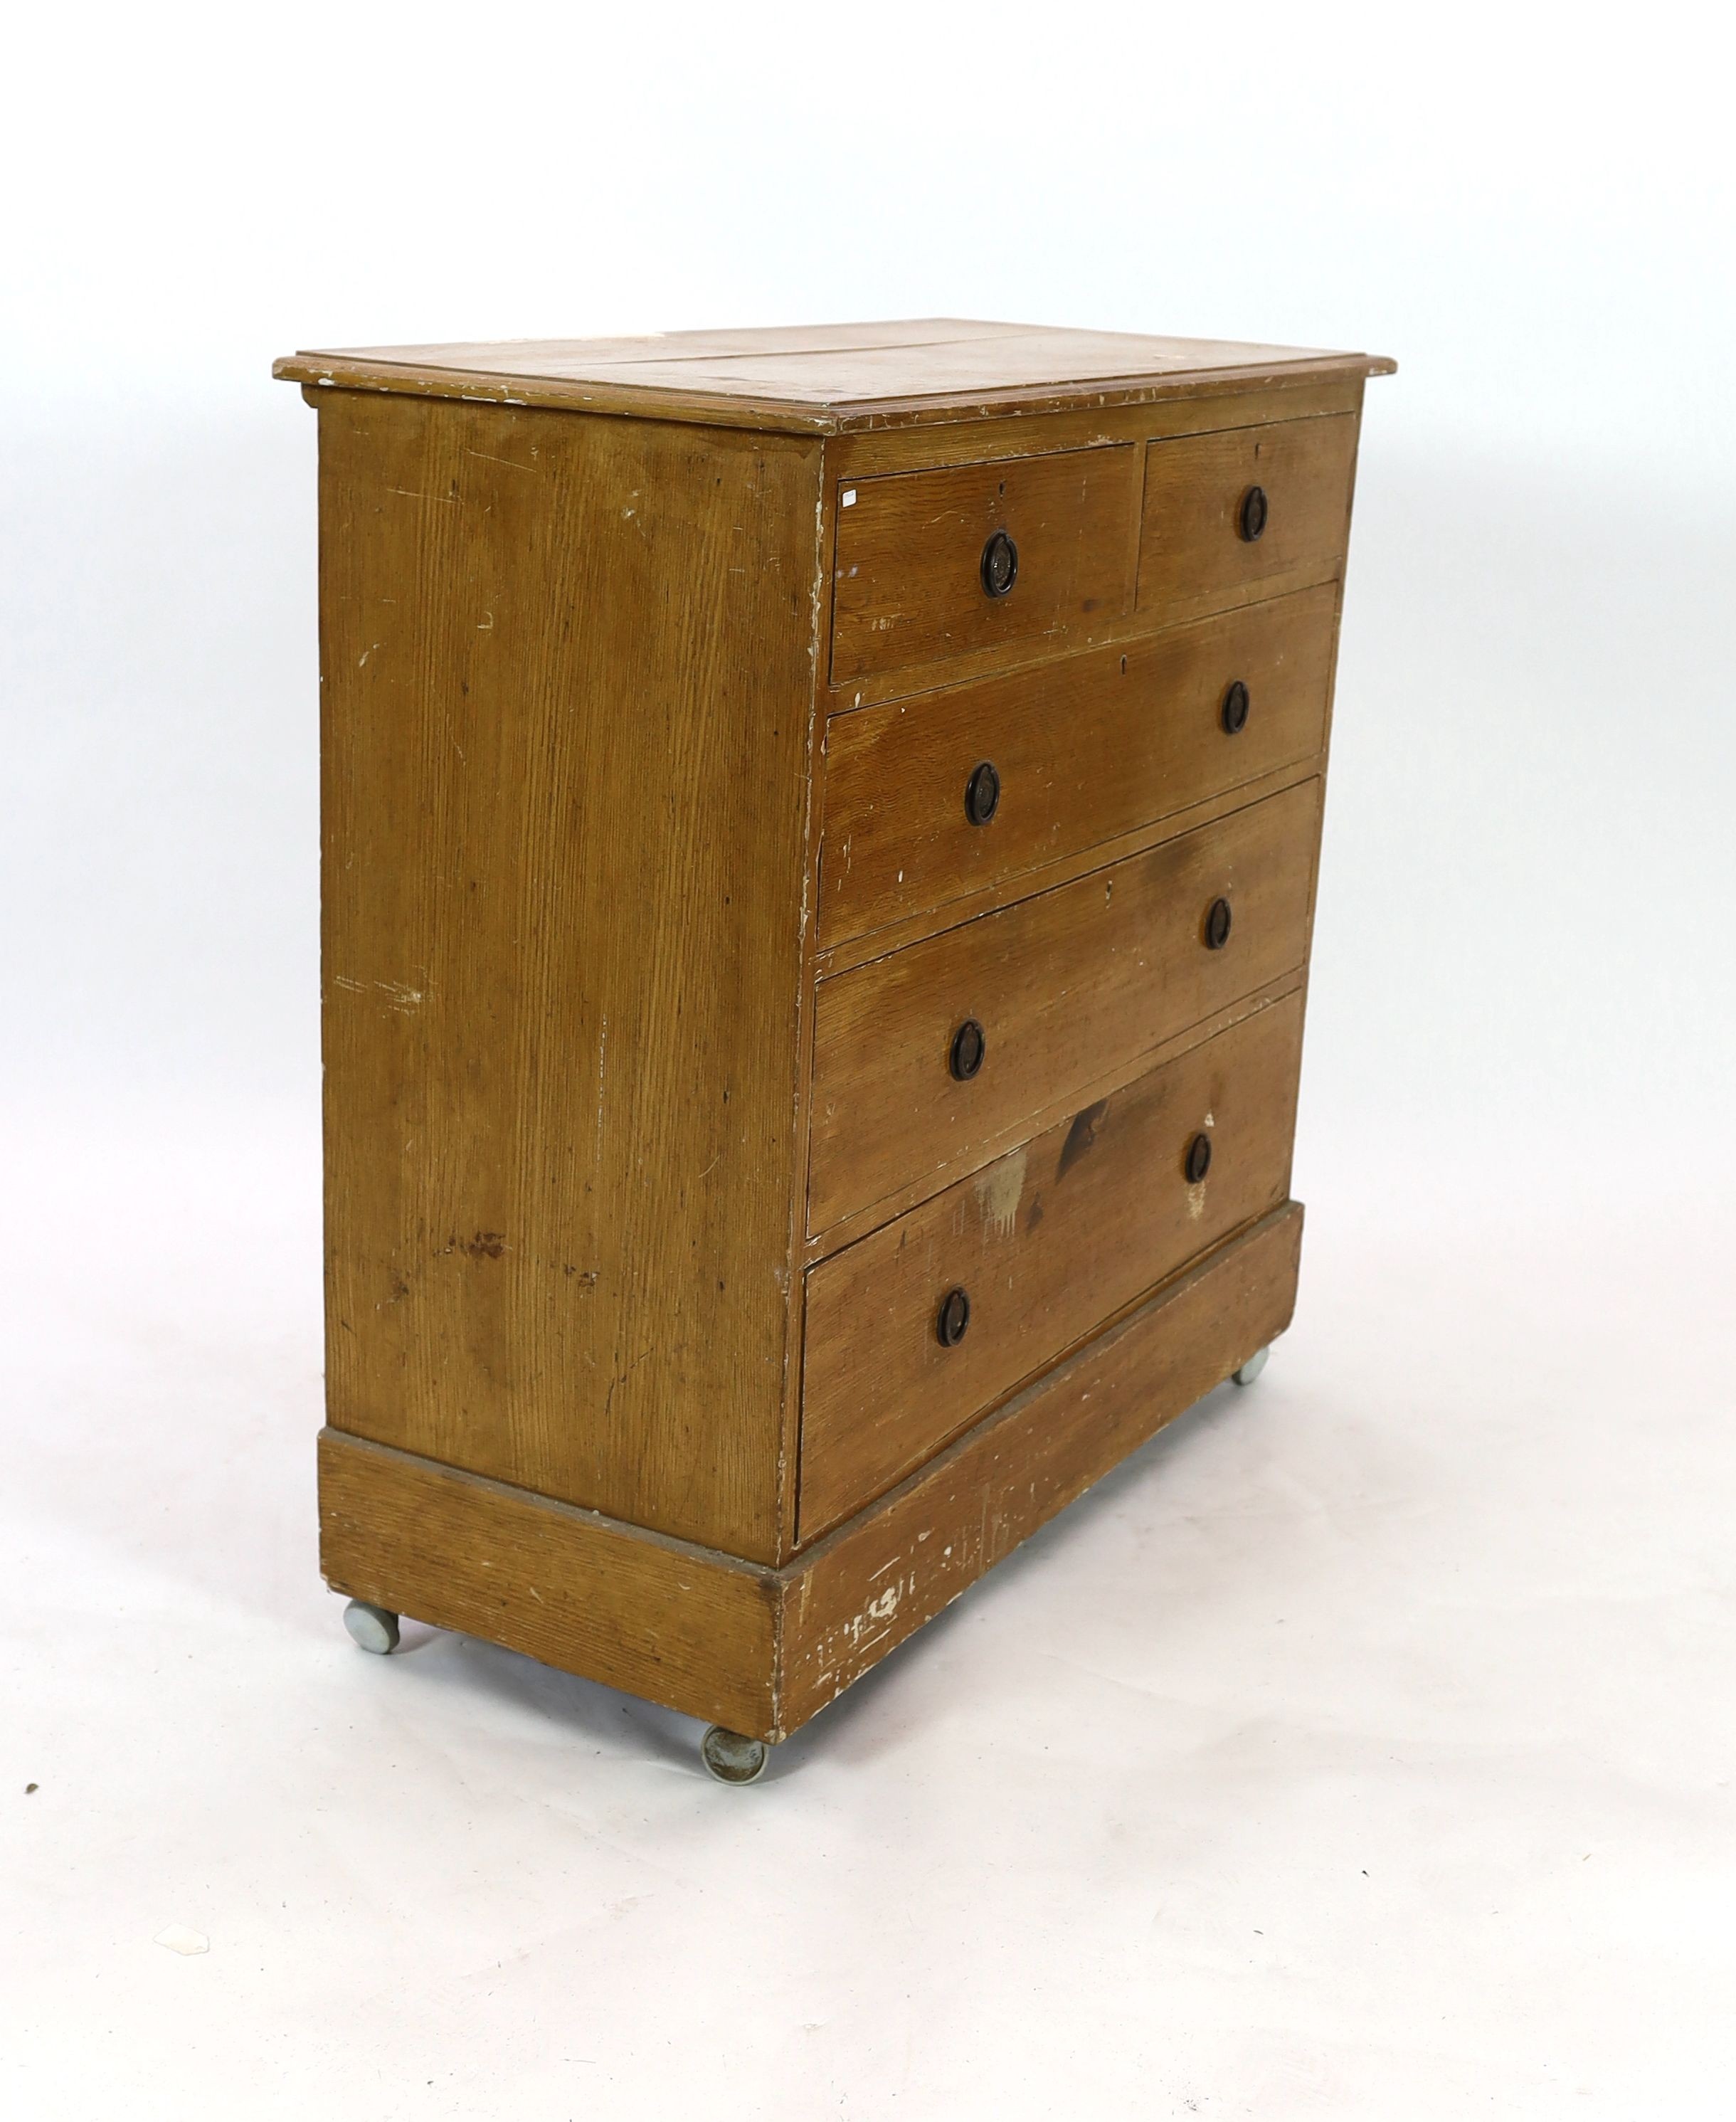 A Victorian pine chest, with painted grain, width 101cm depth 47cm height 102cm